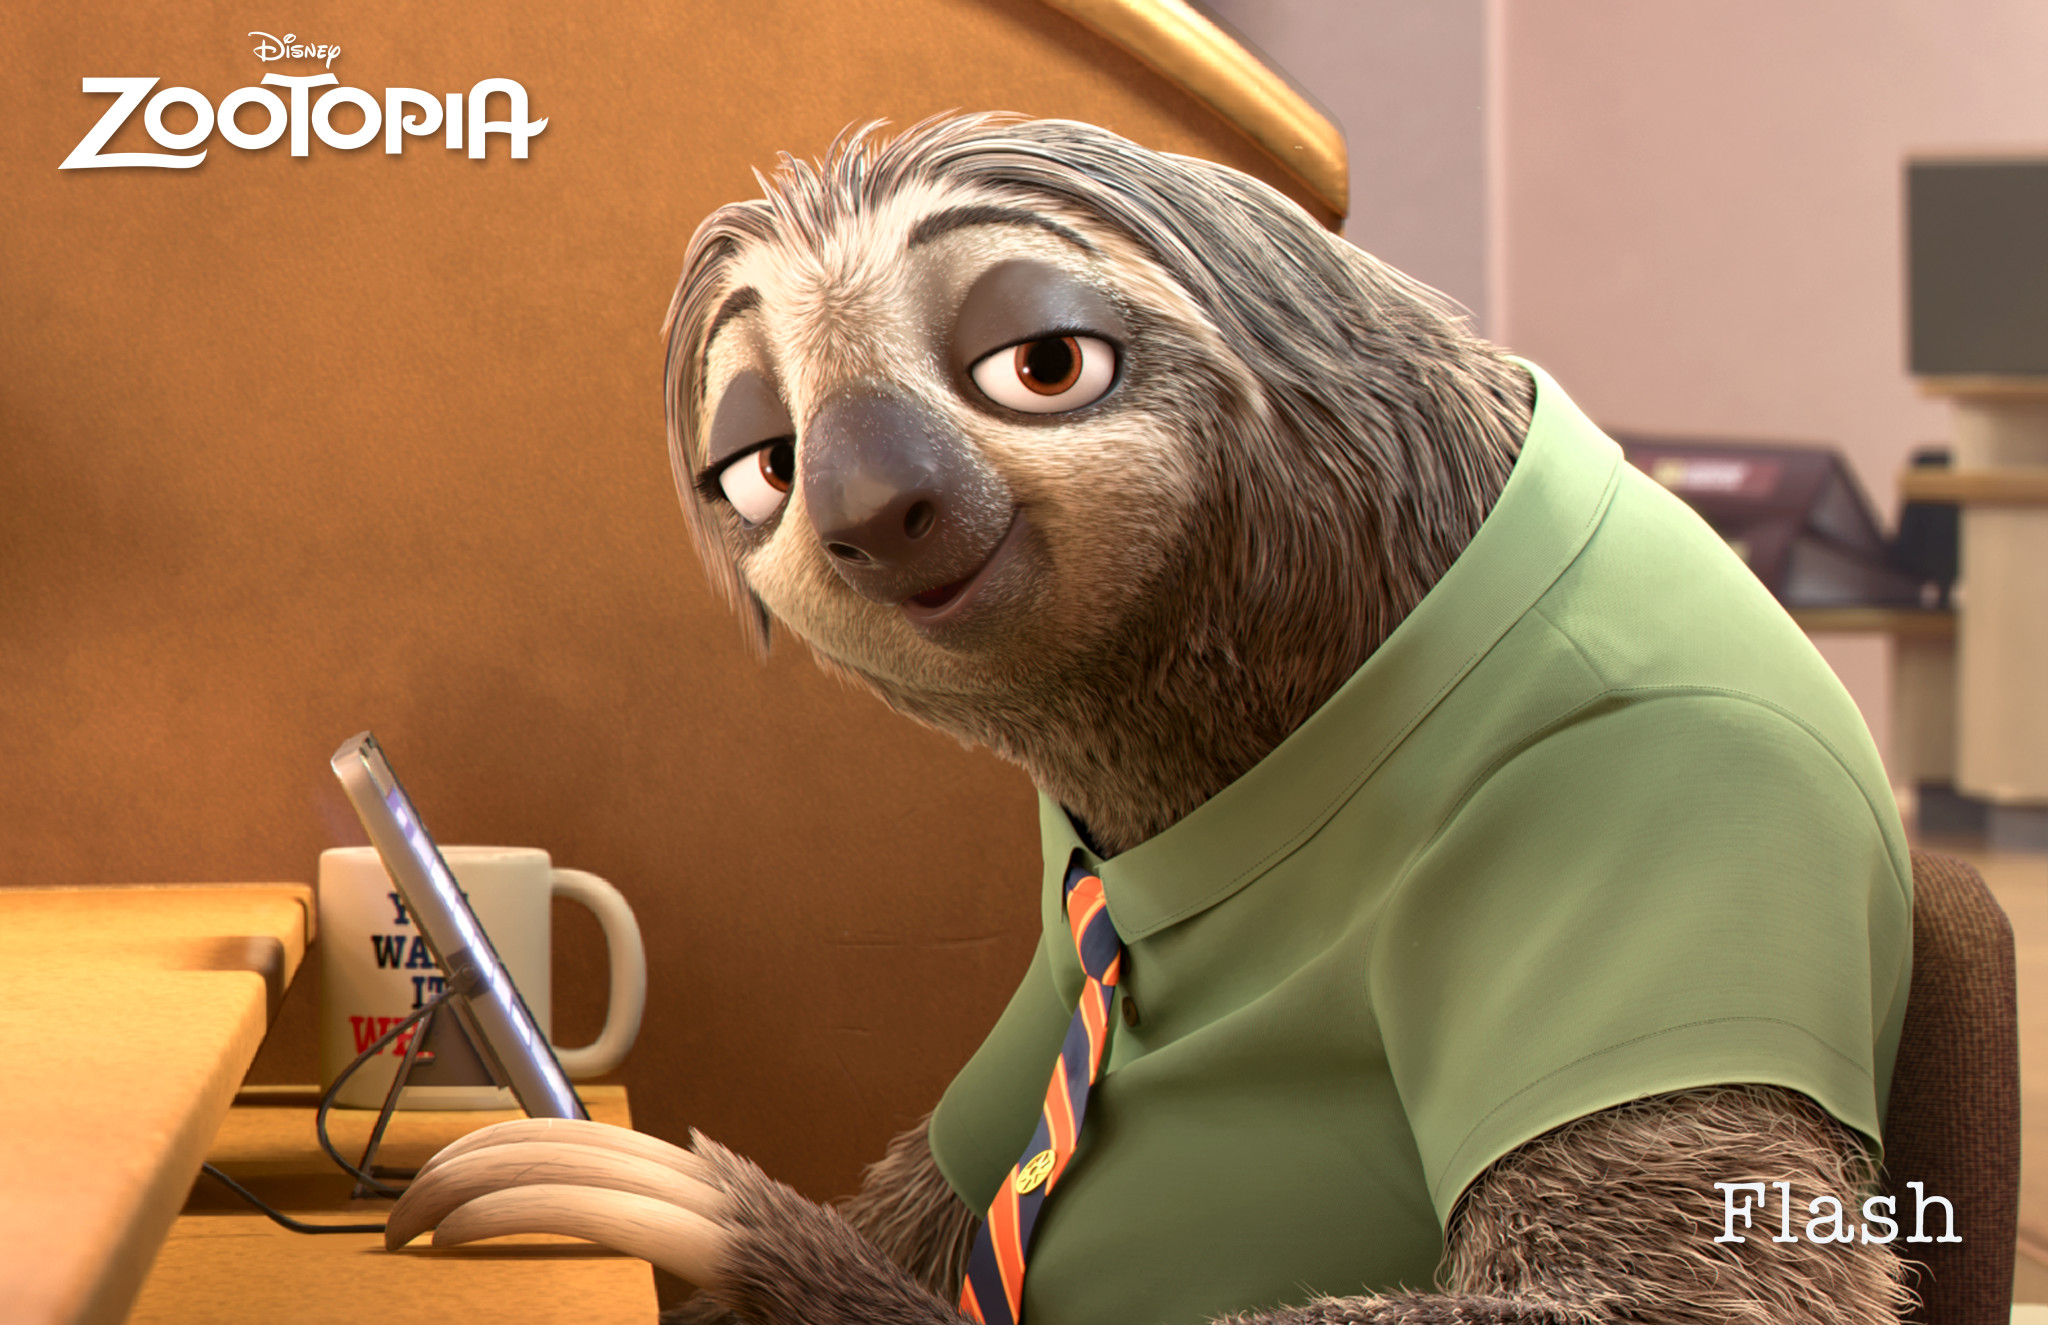 New Trailer for Zootopia Is Full Of Fun and Laughs